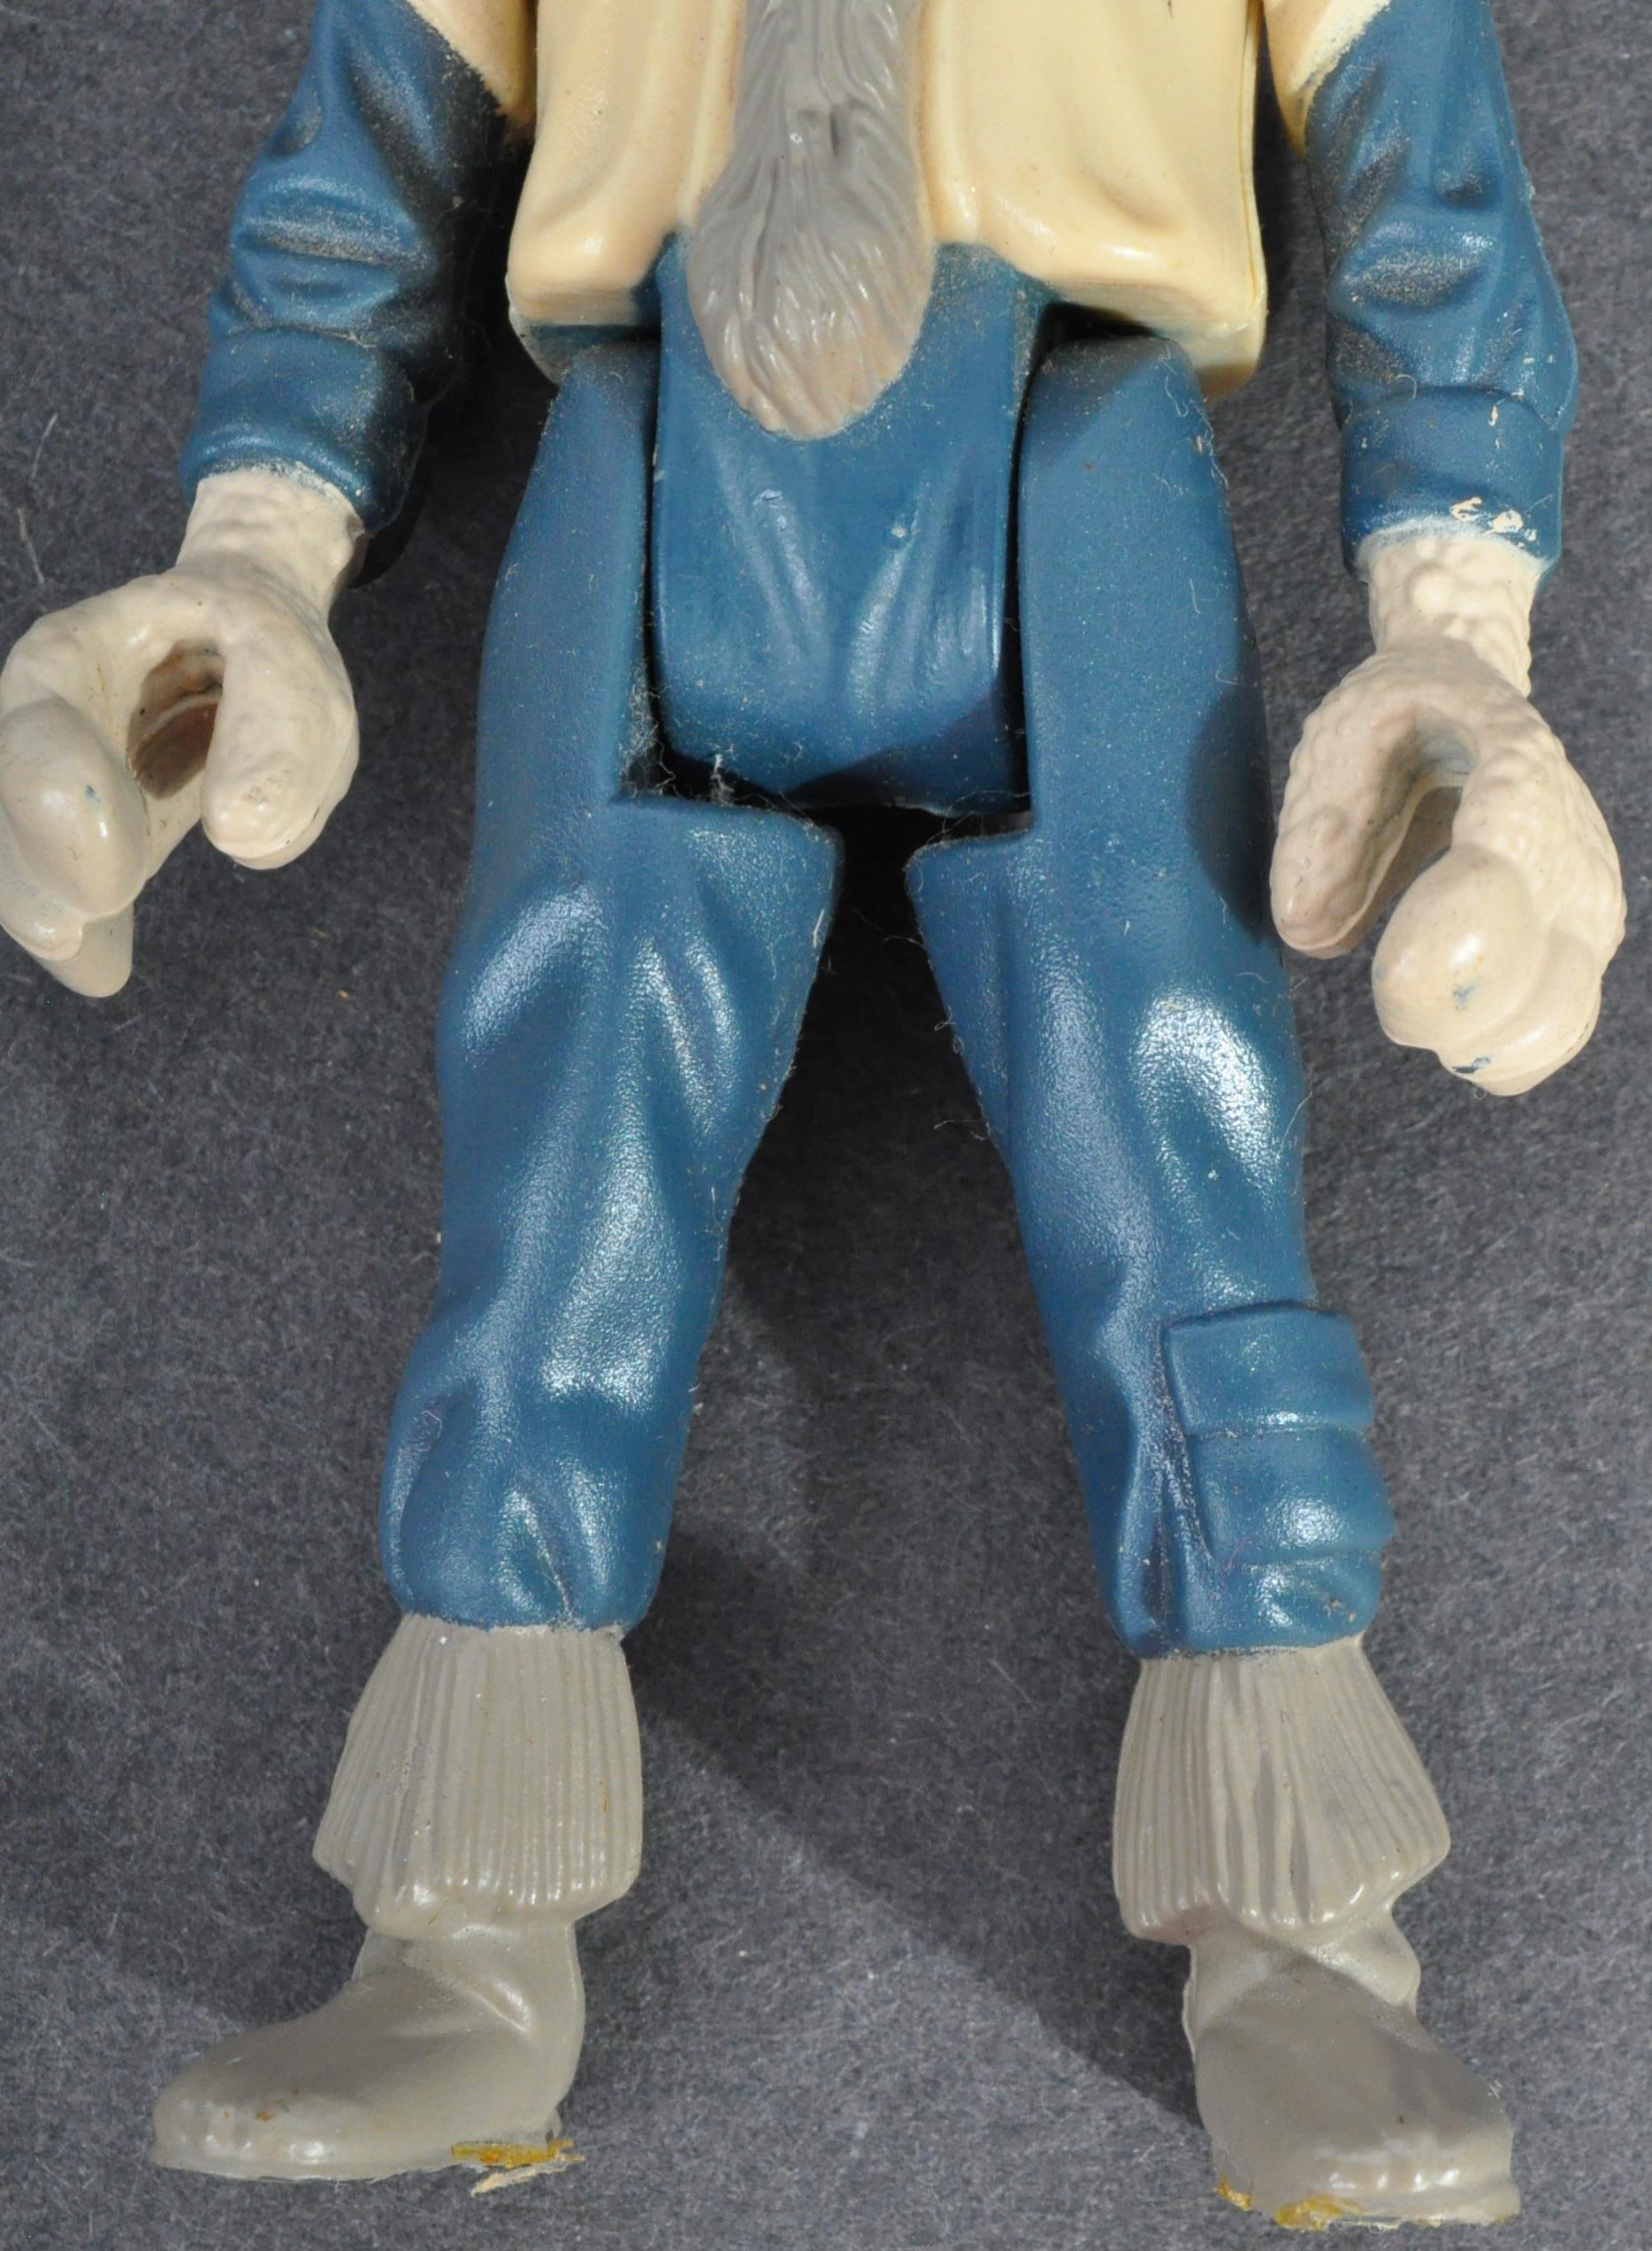 STAR WARS - LAST 17 - RARE YAK FACE ACTION FIGURE - Image 4 of 6